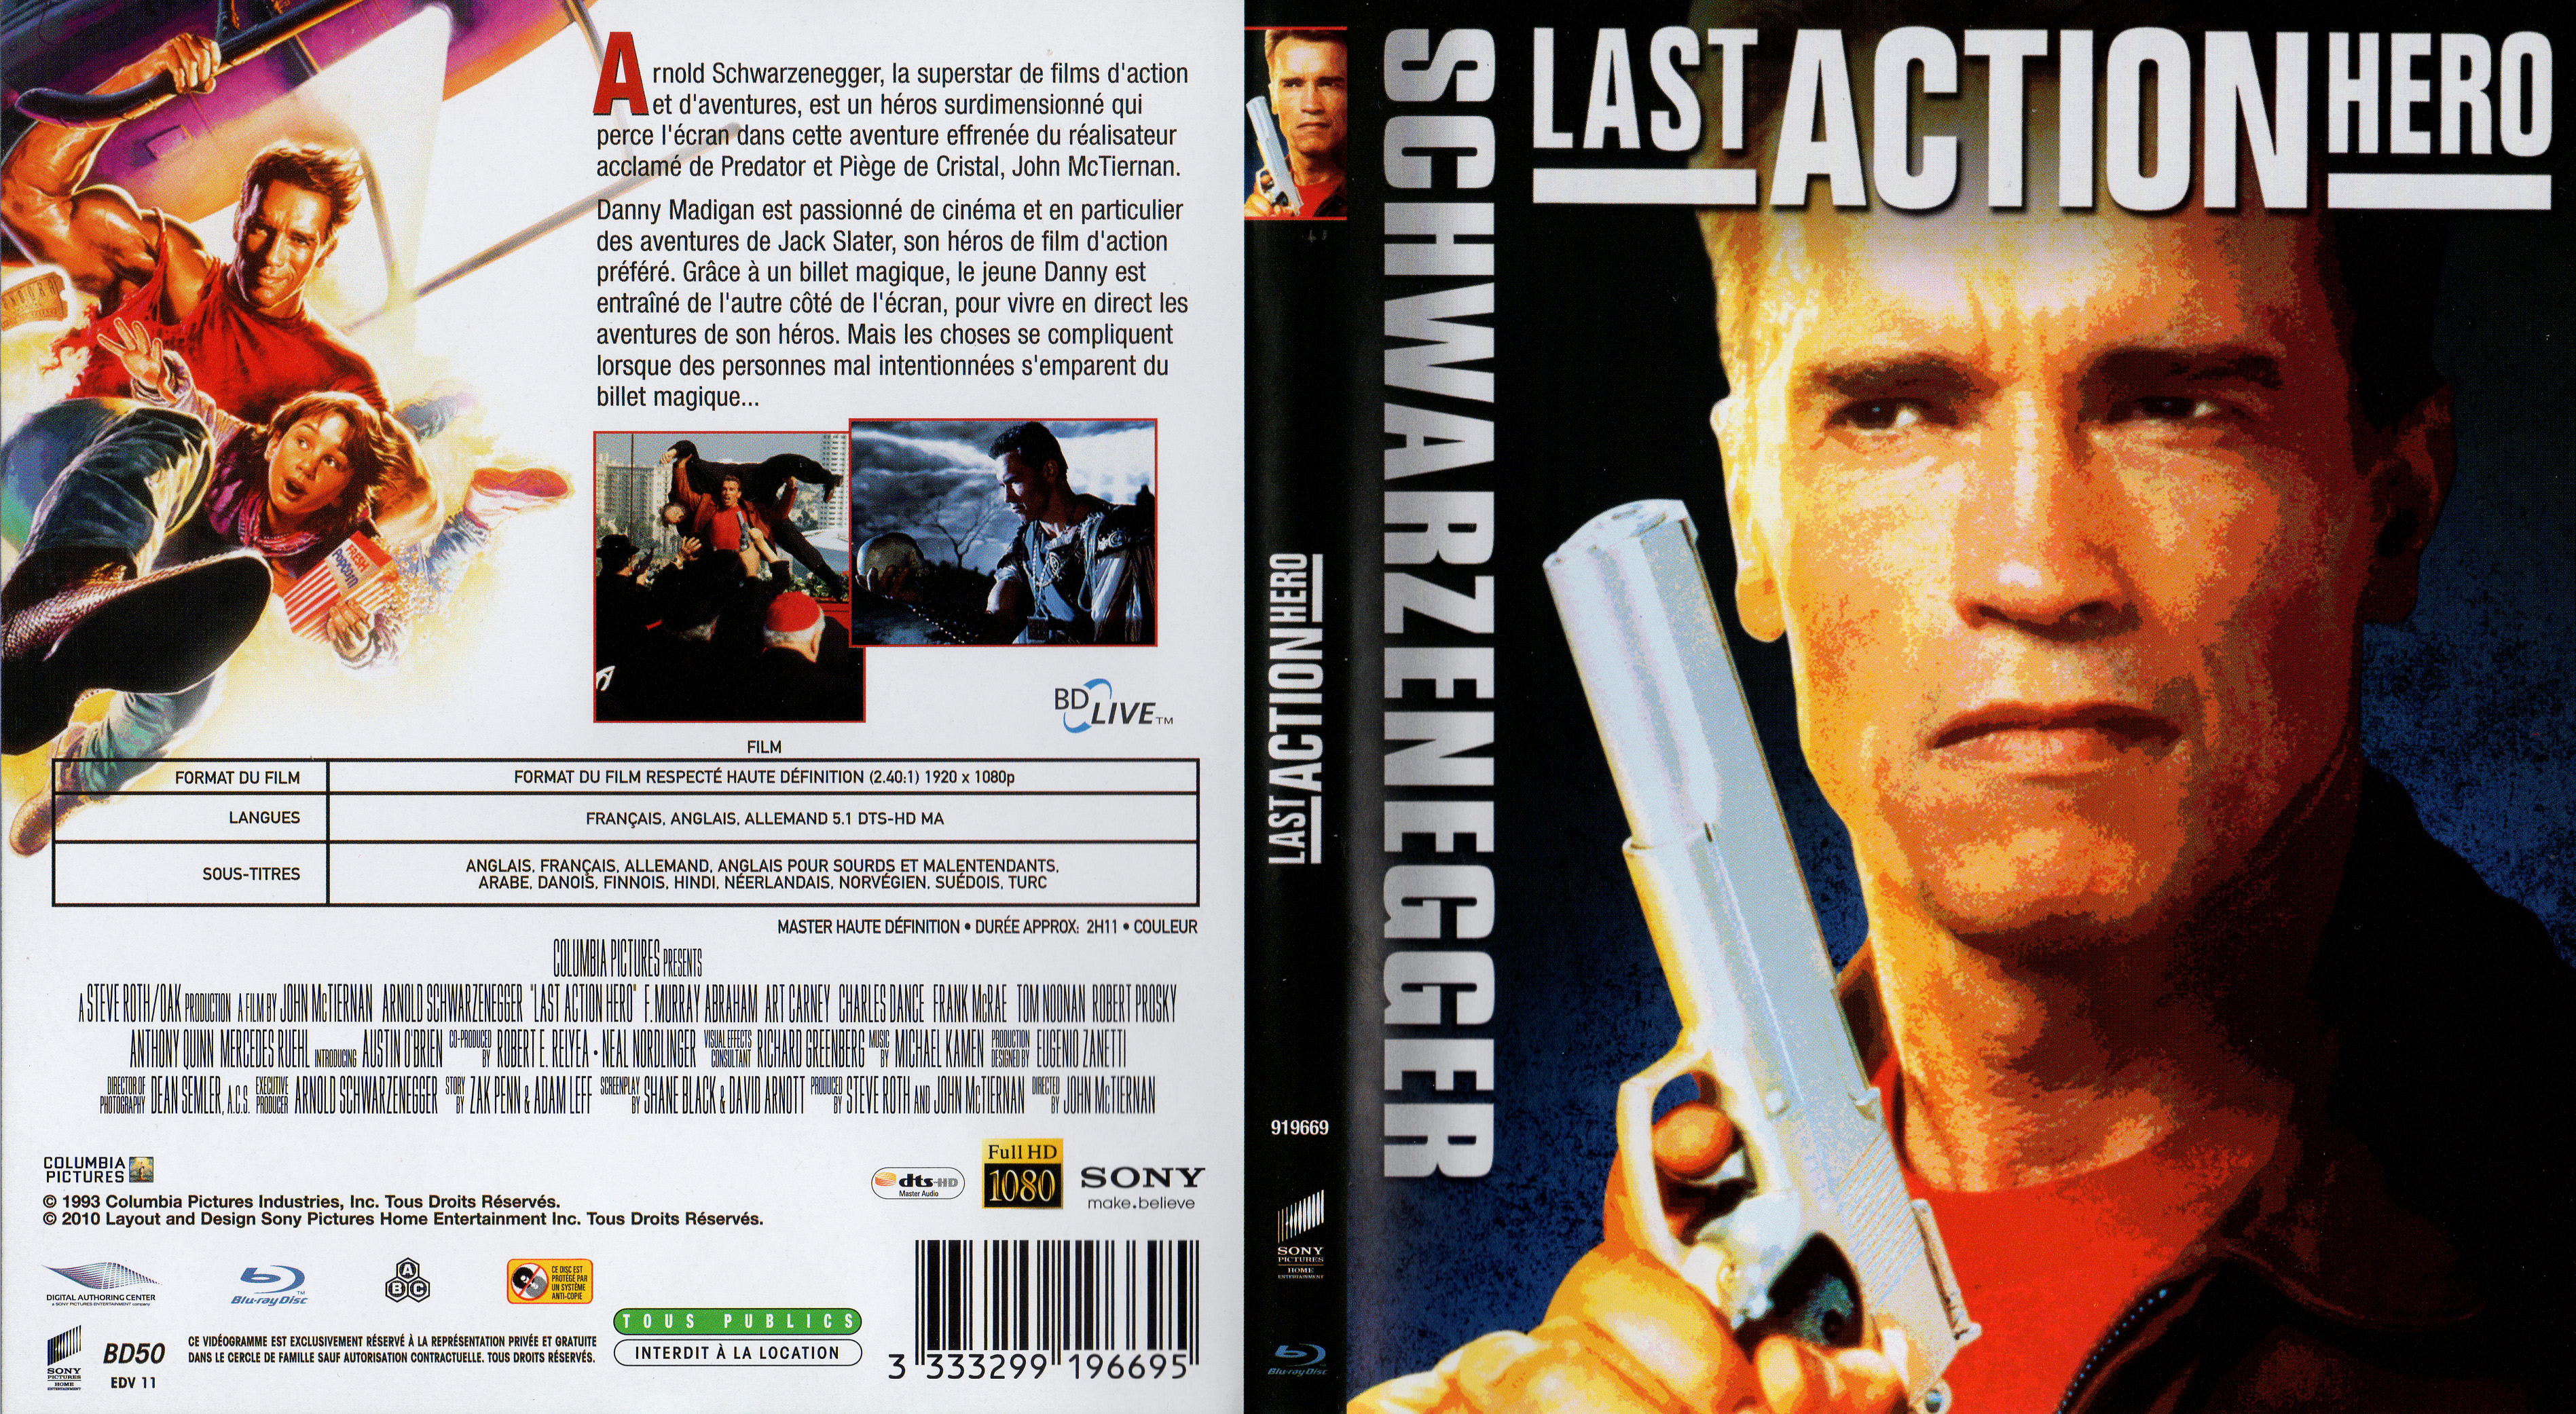 Jaquette DVD Last action hero (BLU-RAY)